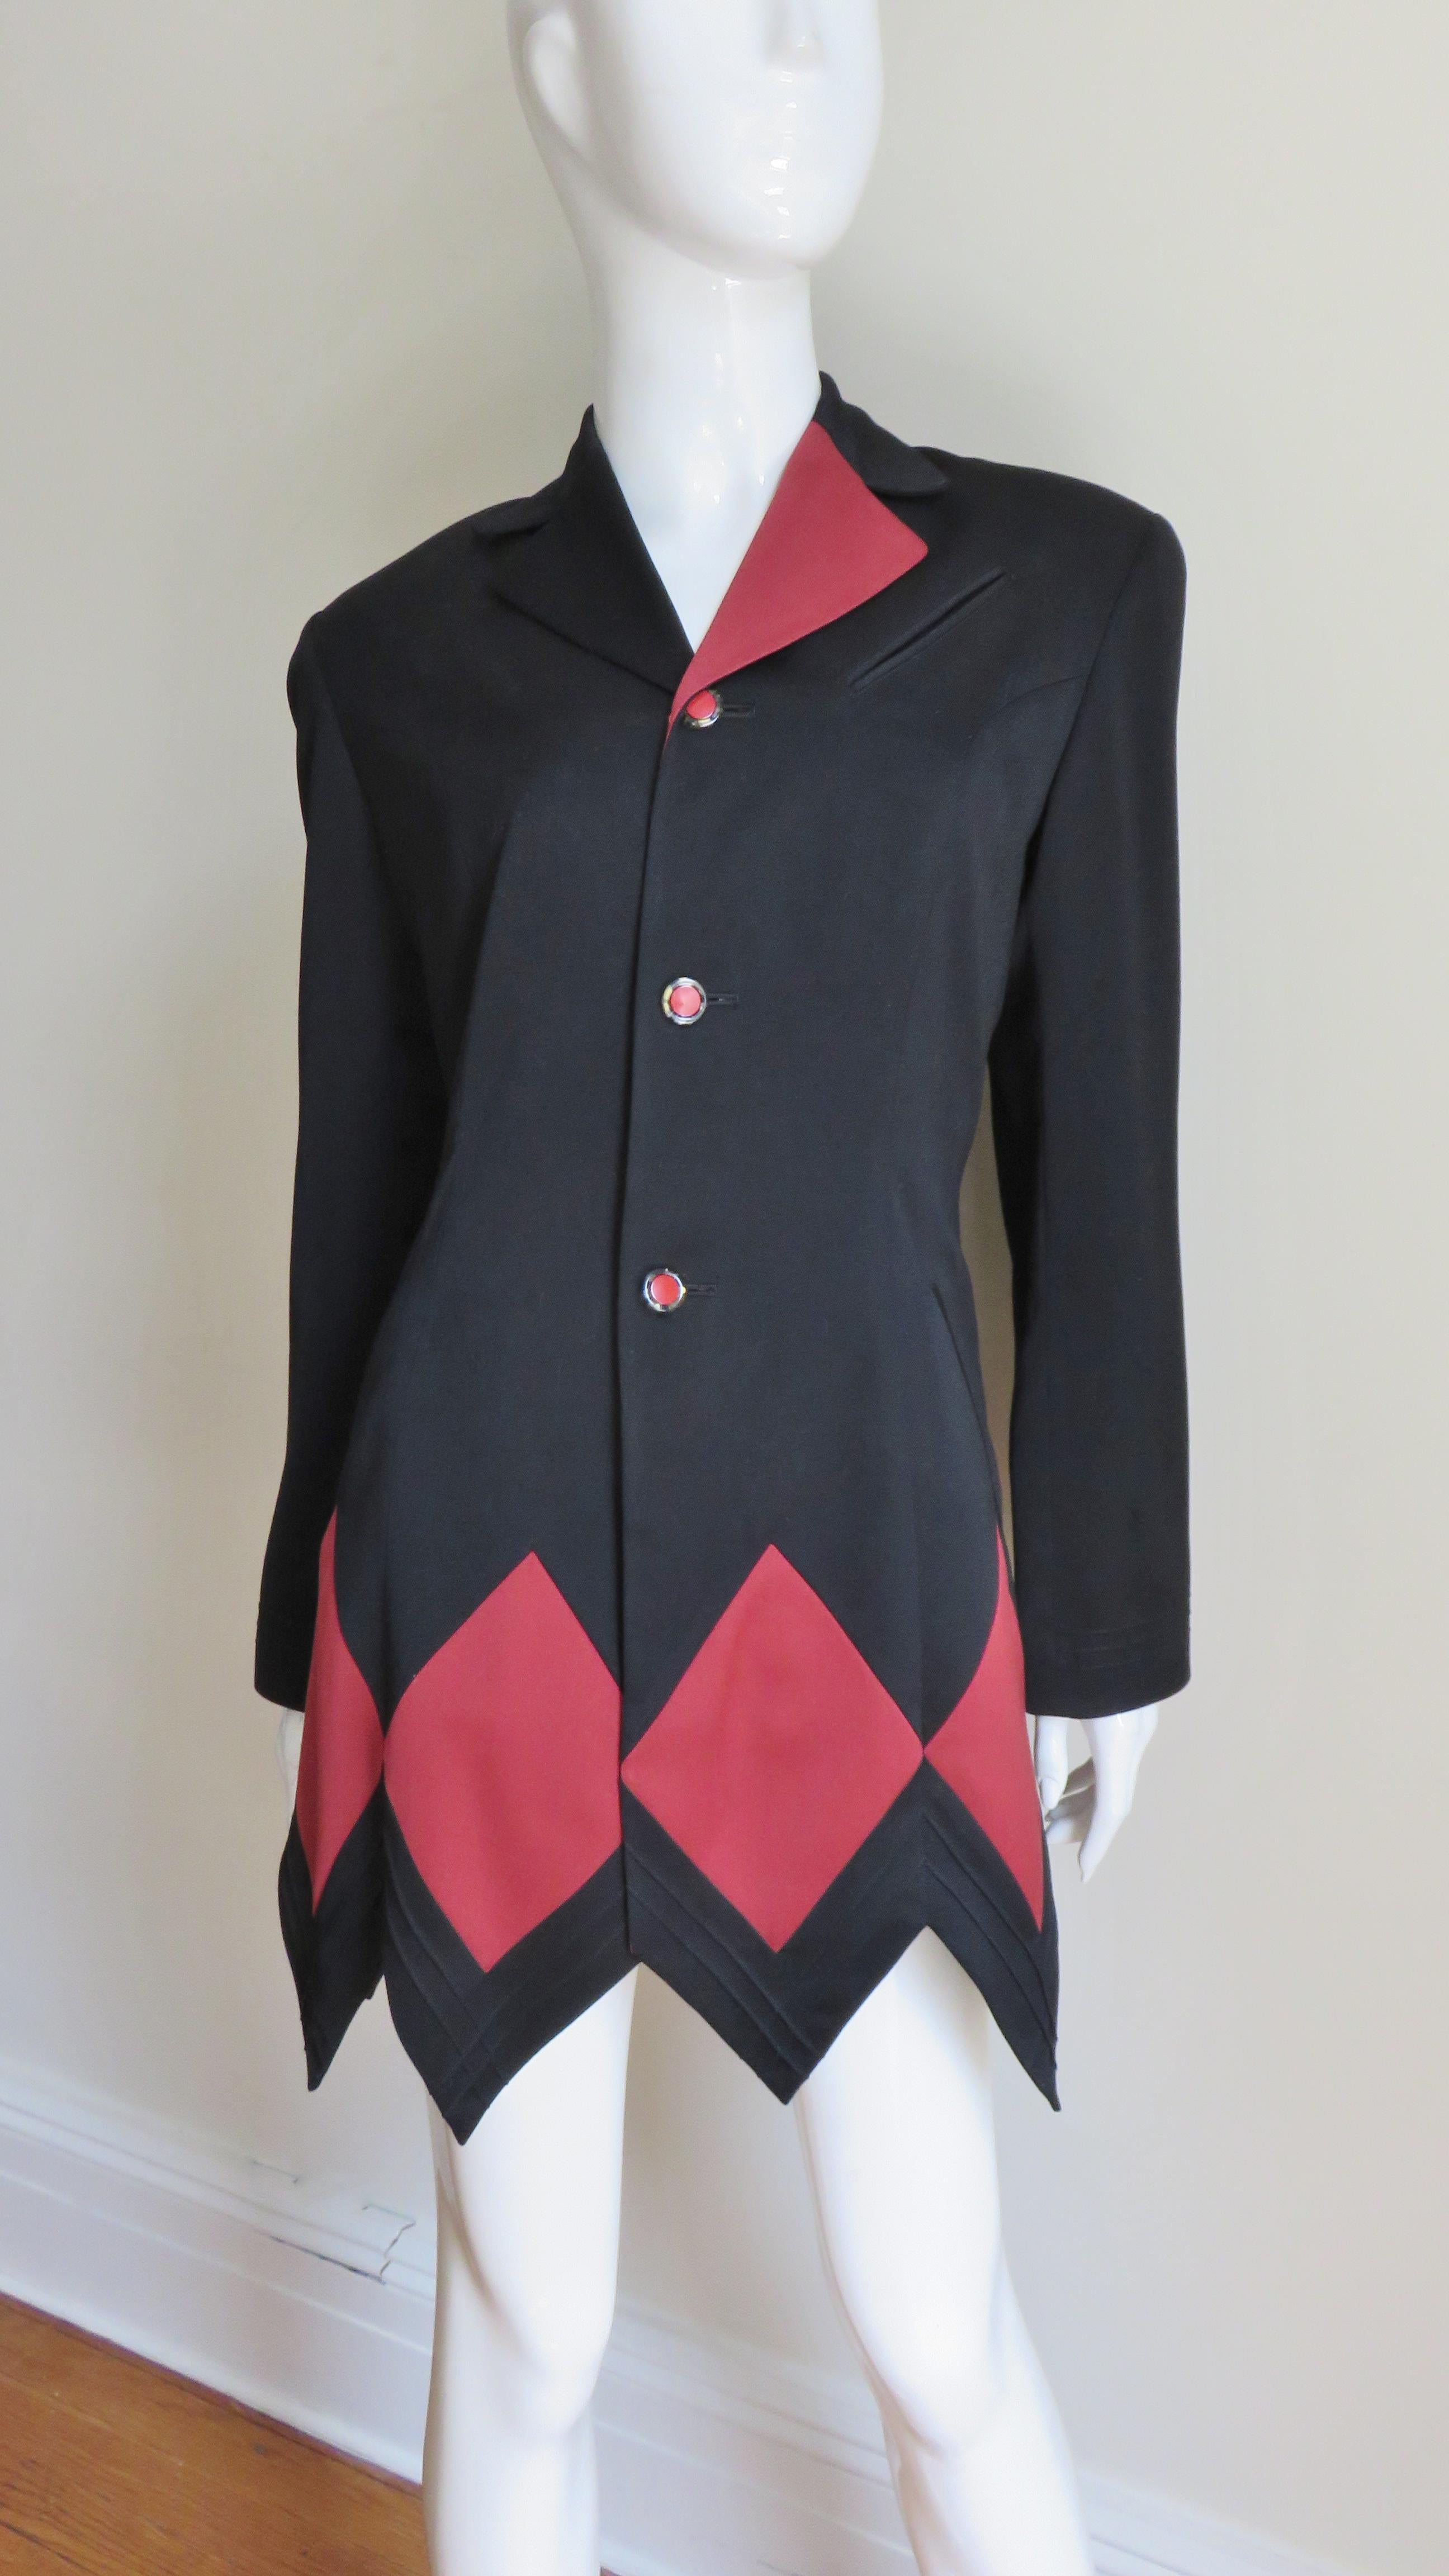 Matsuda Color Block Harlequin Jacket In Excellent Condition For Sale In Water Mill, NY